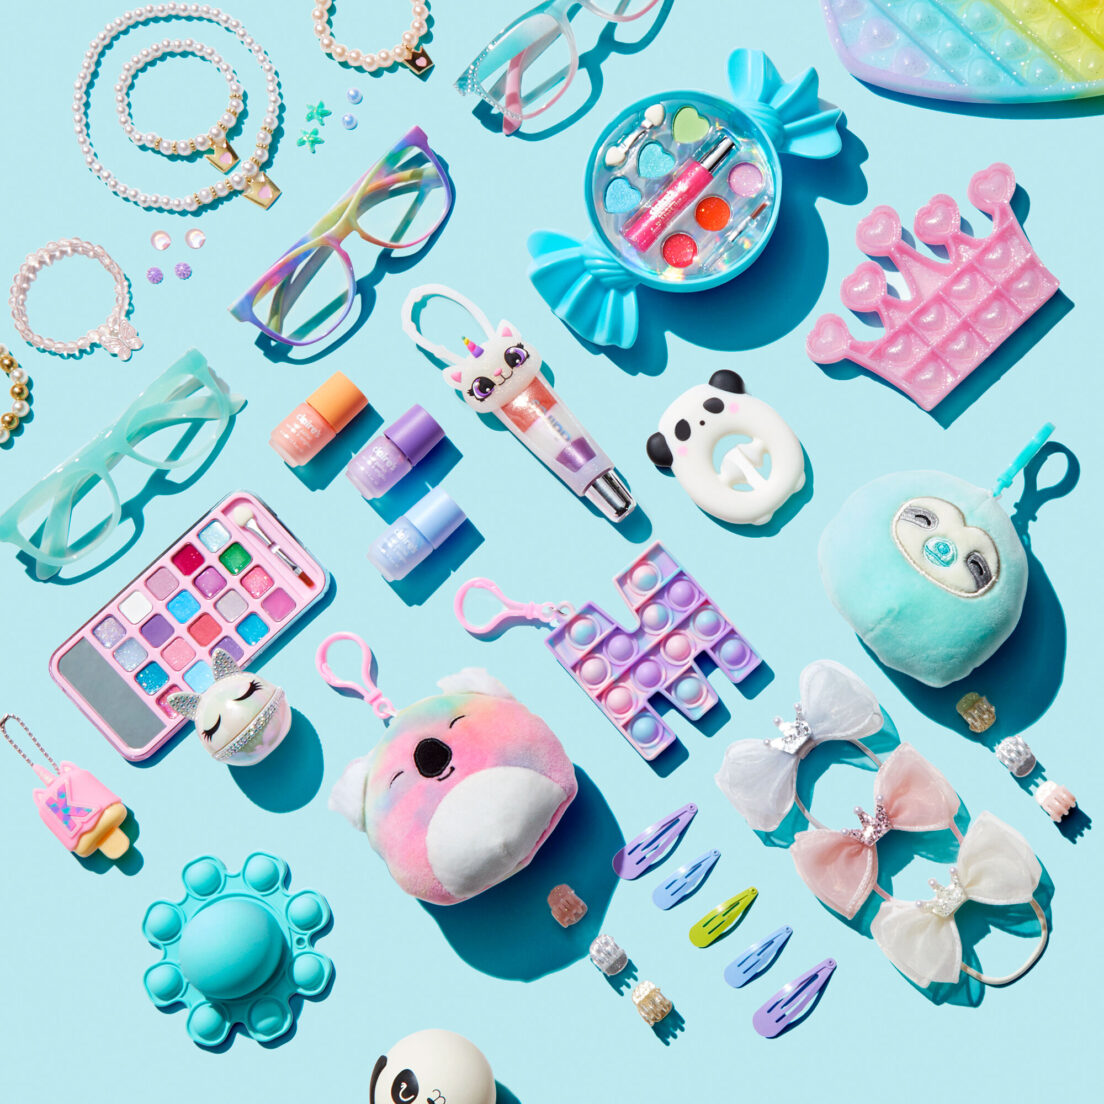 Claire's Launches A New Jewelry and Accessories Subscription Box: Cdrop! -  Hello Subscription